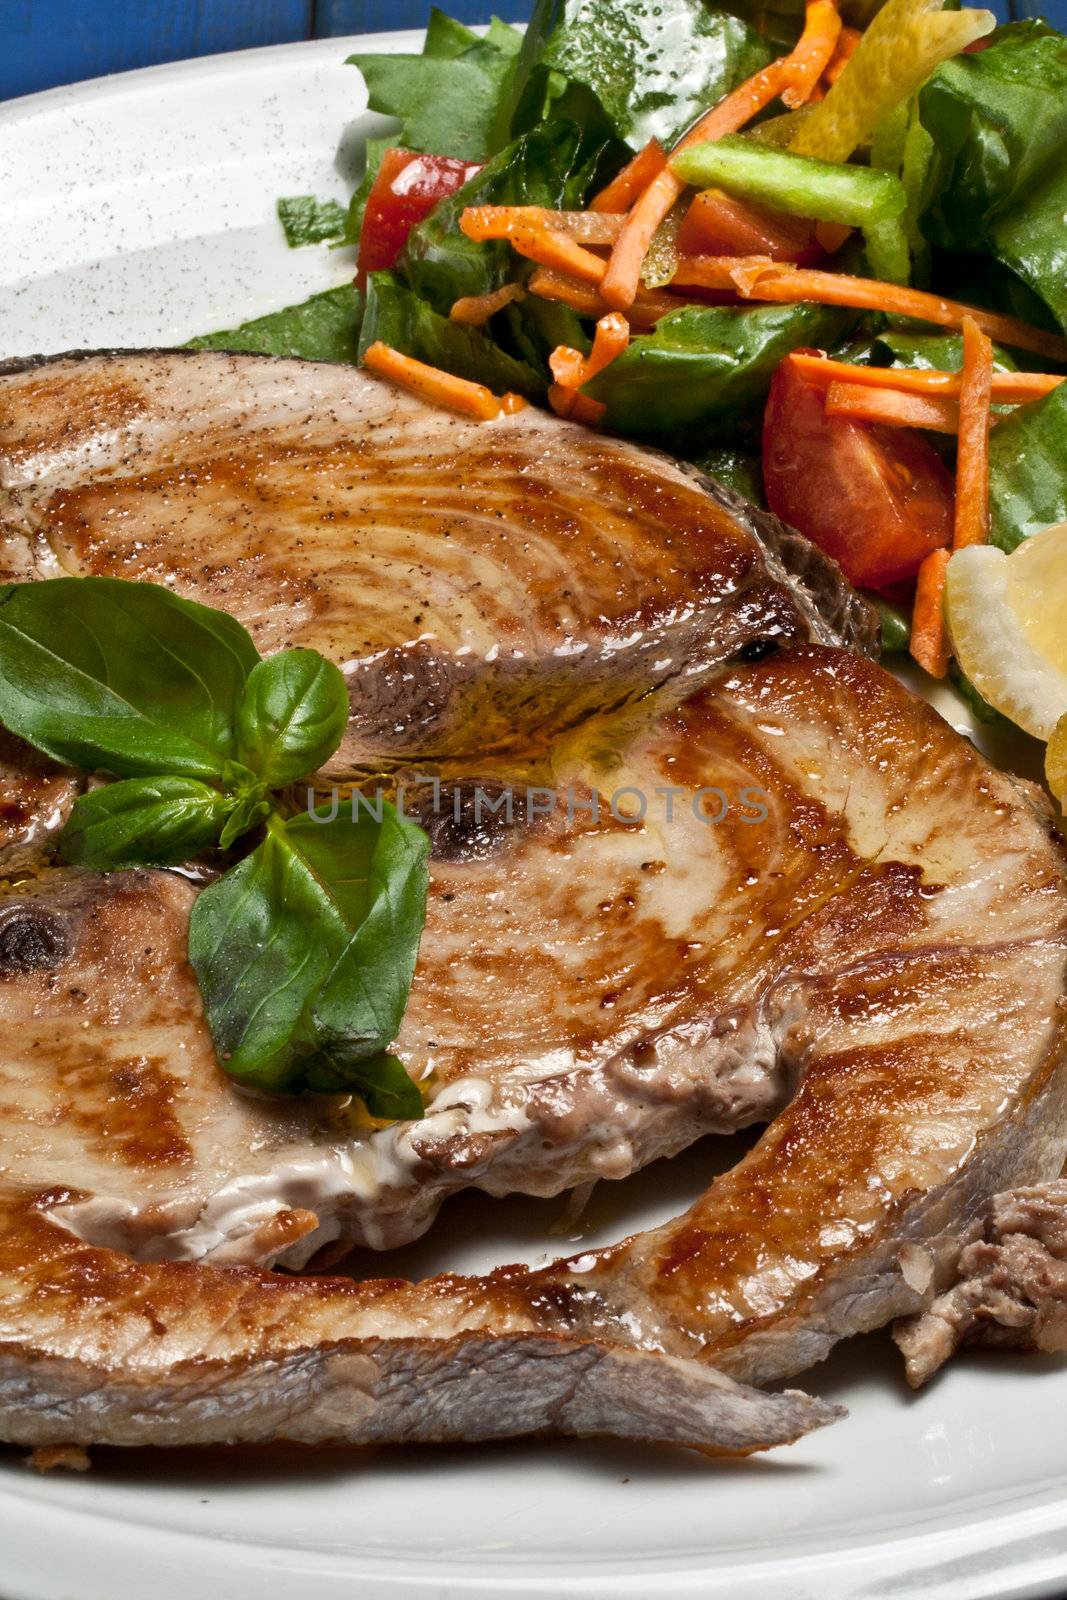 cooked swordfish served with salad and lemon